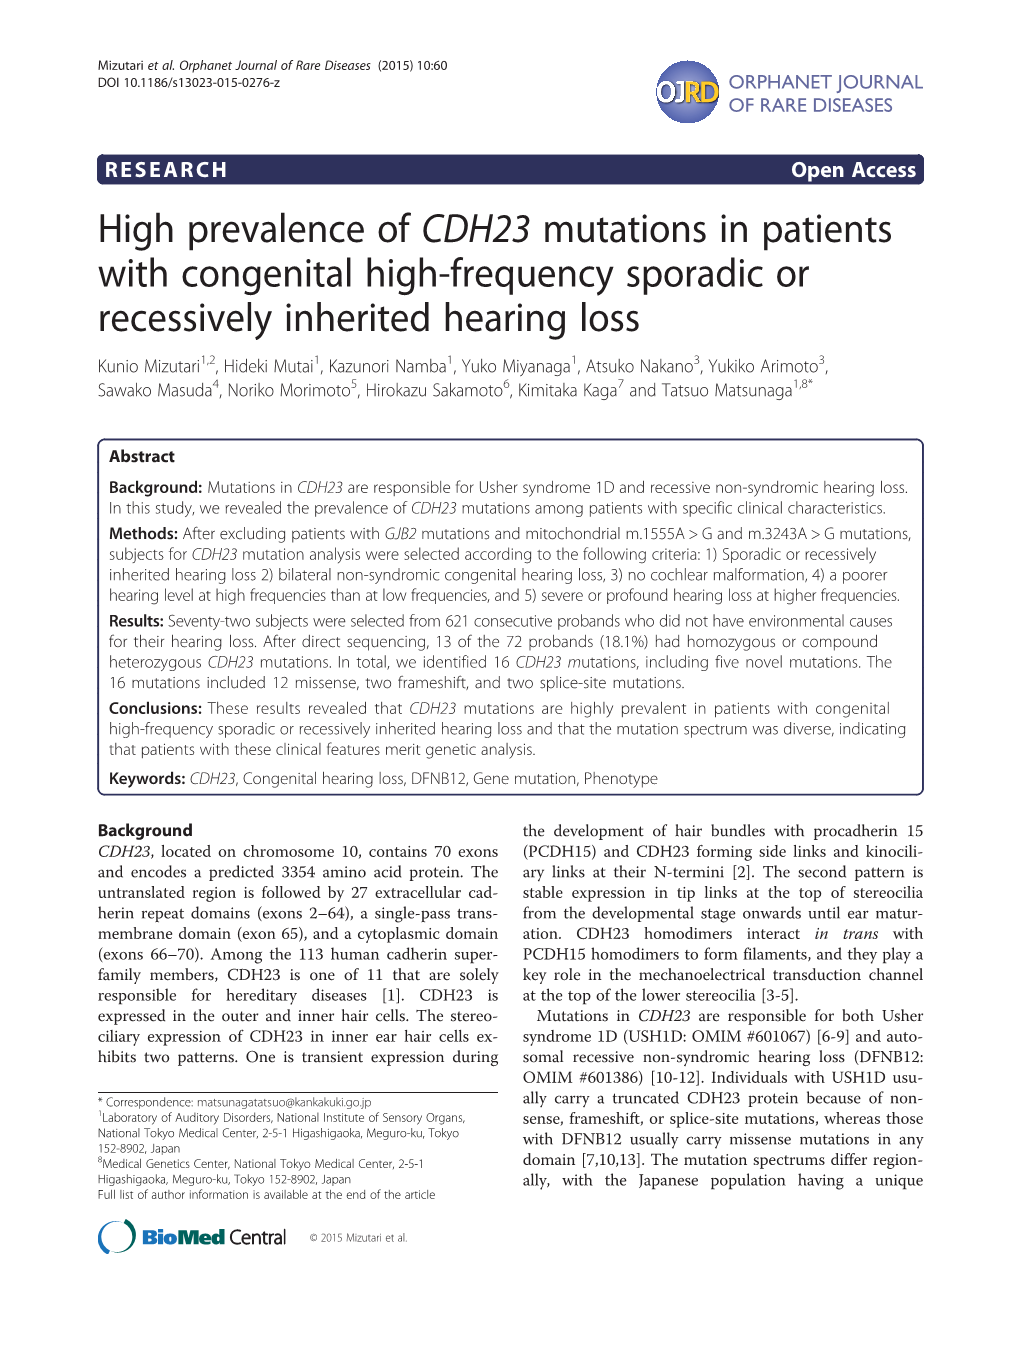 High Prevalence of CDH23 Mutations in Patients with Congenital High